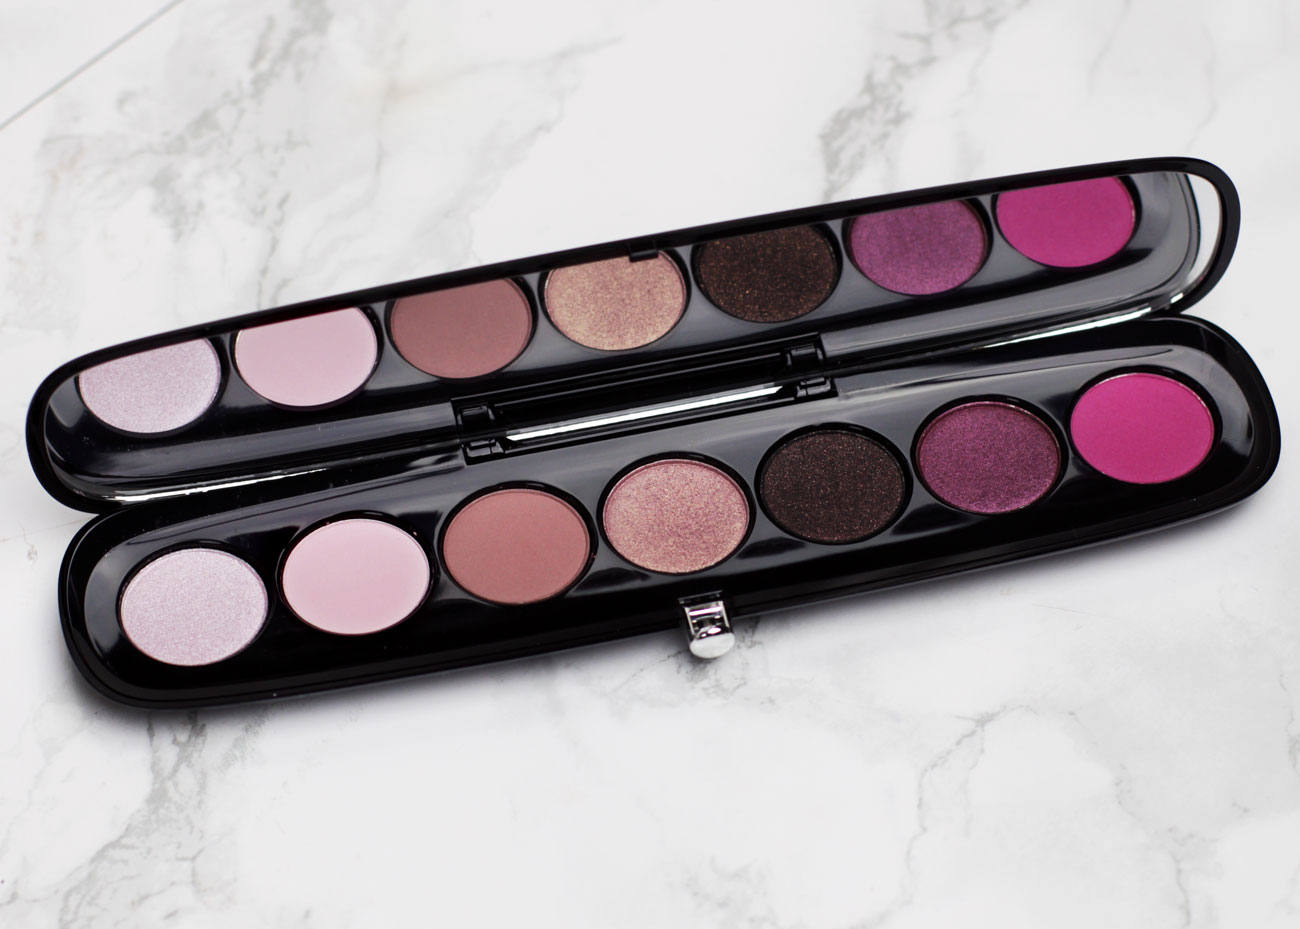 Marc Jacobs Eye-Conic Multi-Finish Eyeshadow Palette 710 Provocouture